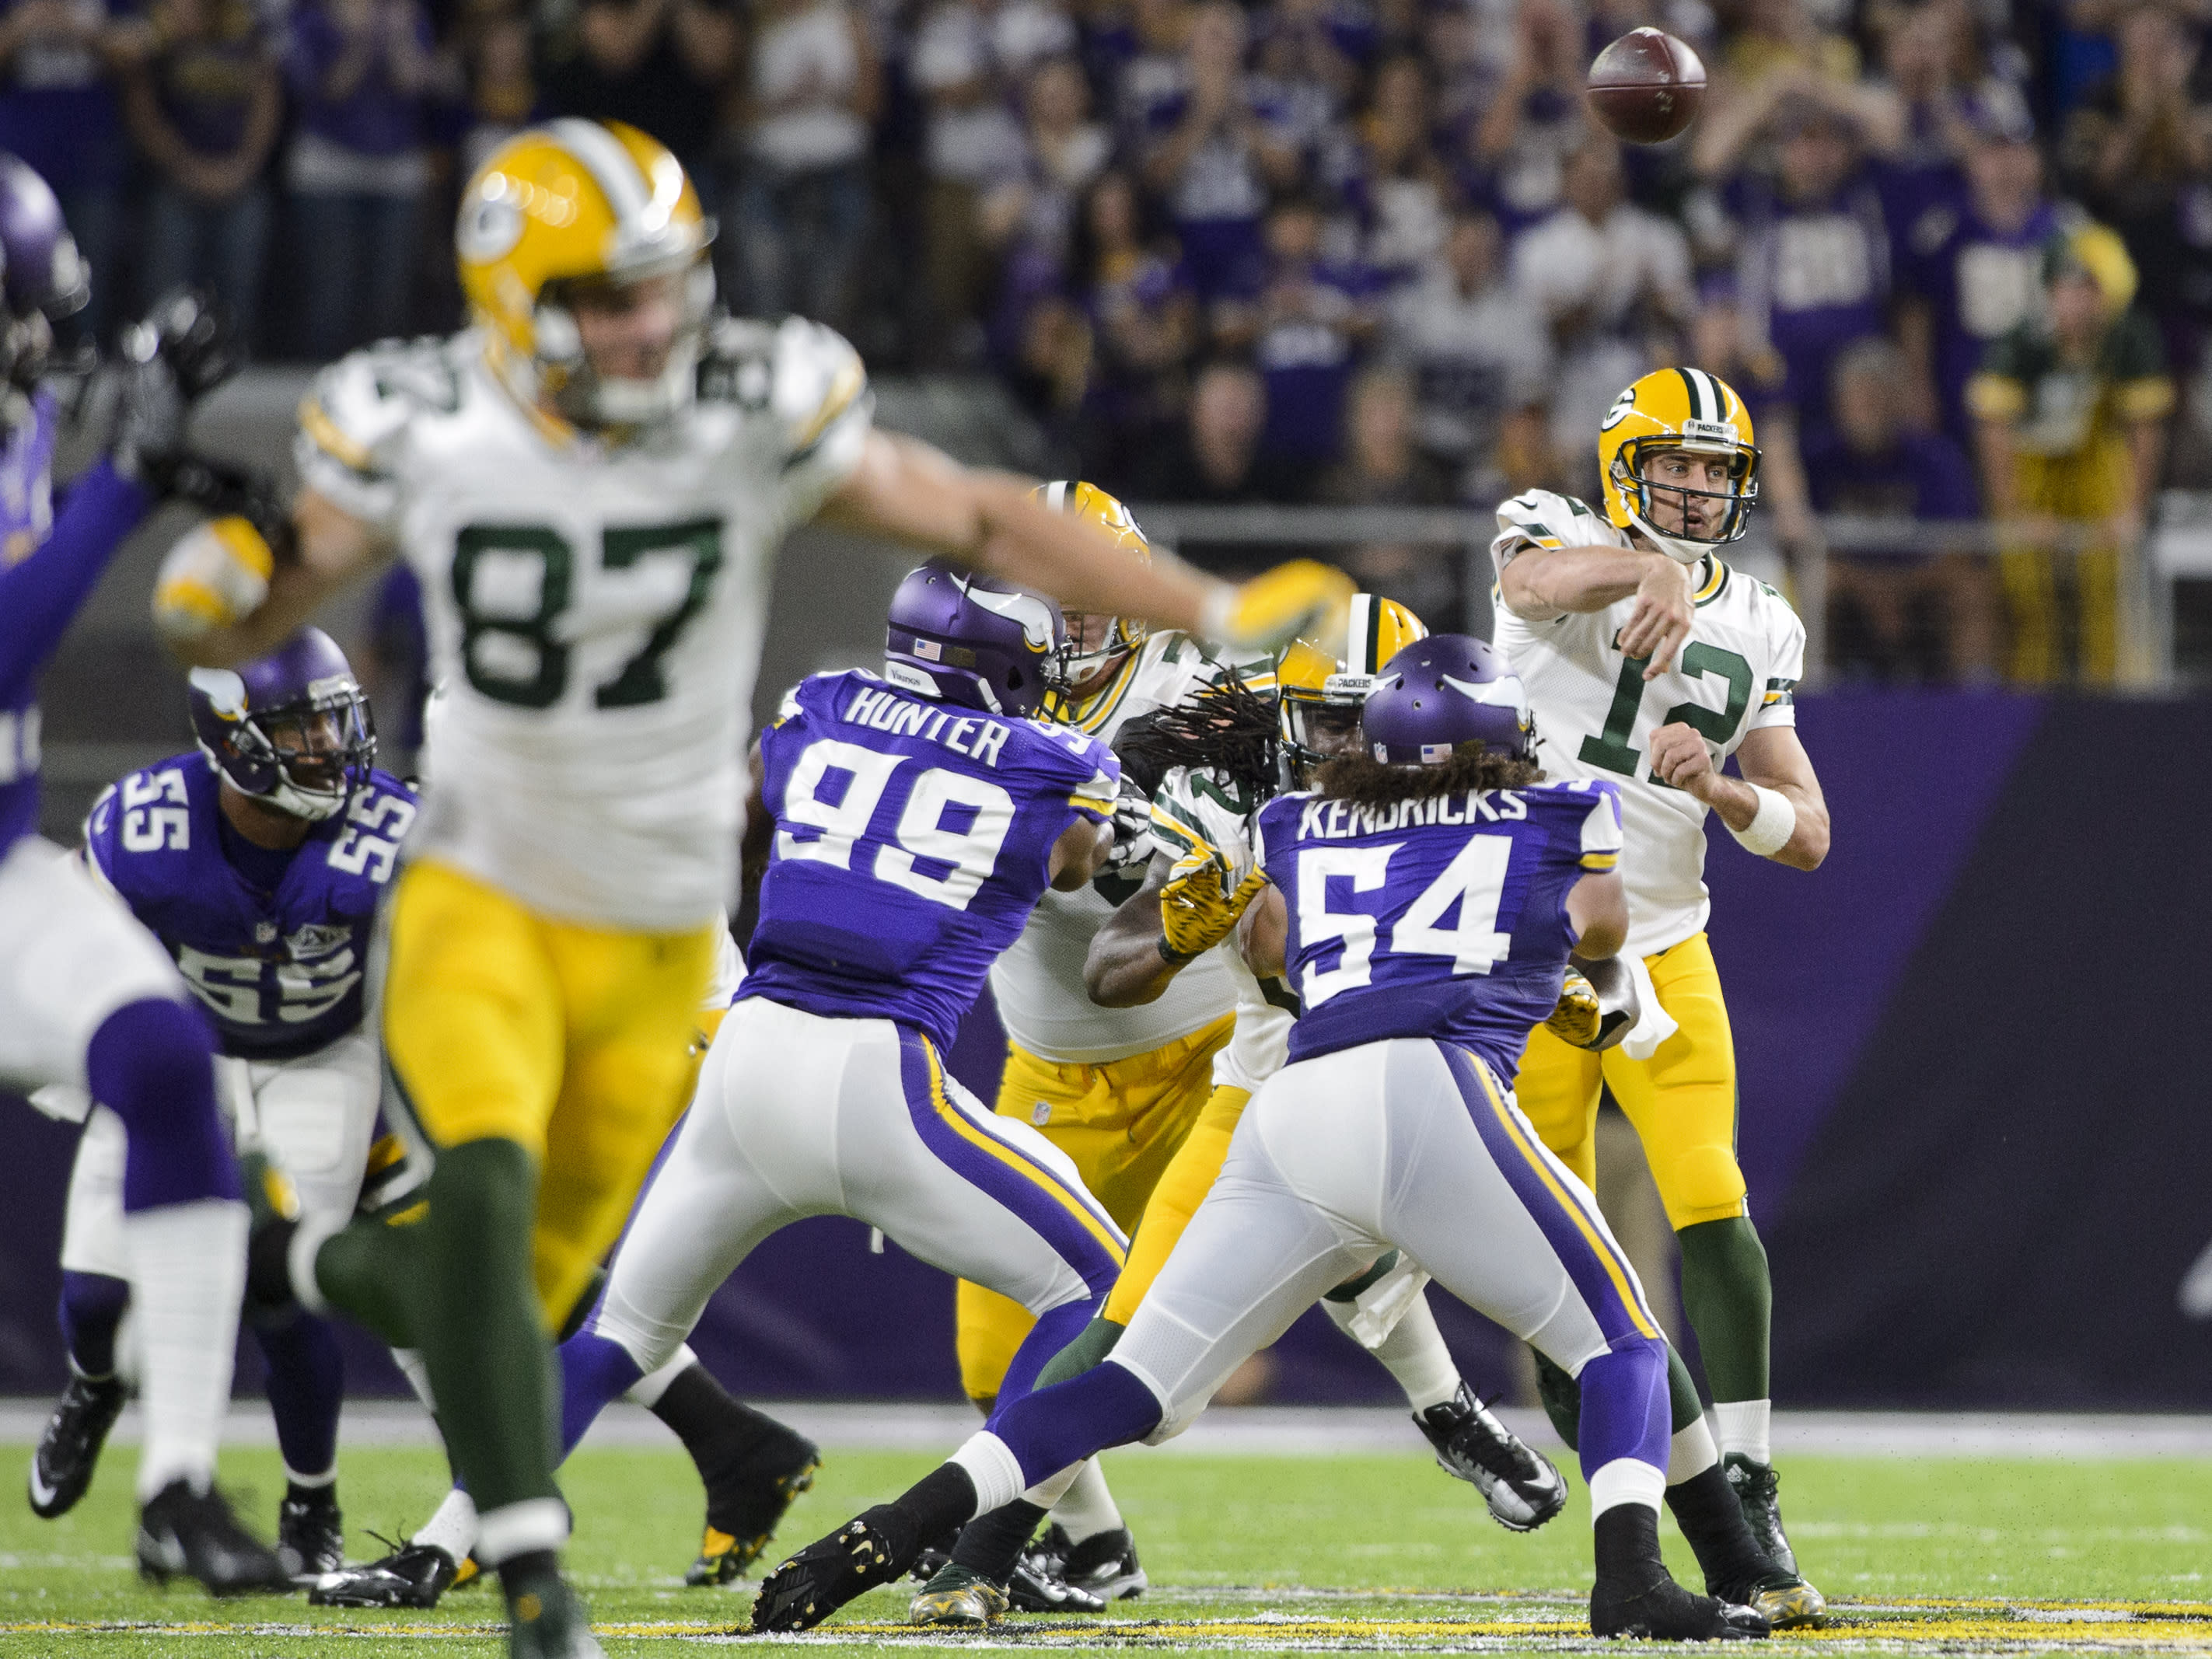 How to Watch the NFL Games Today Online for Free, including Packers vs